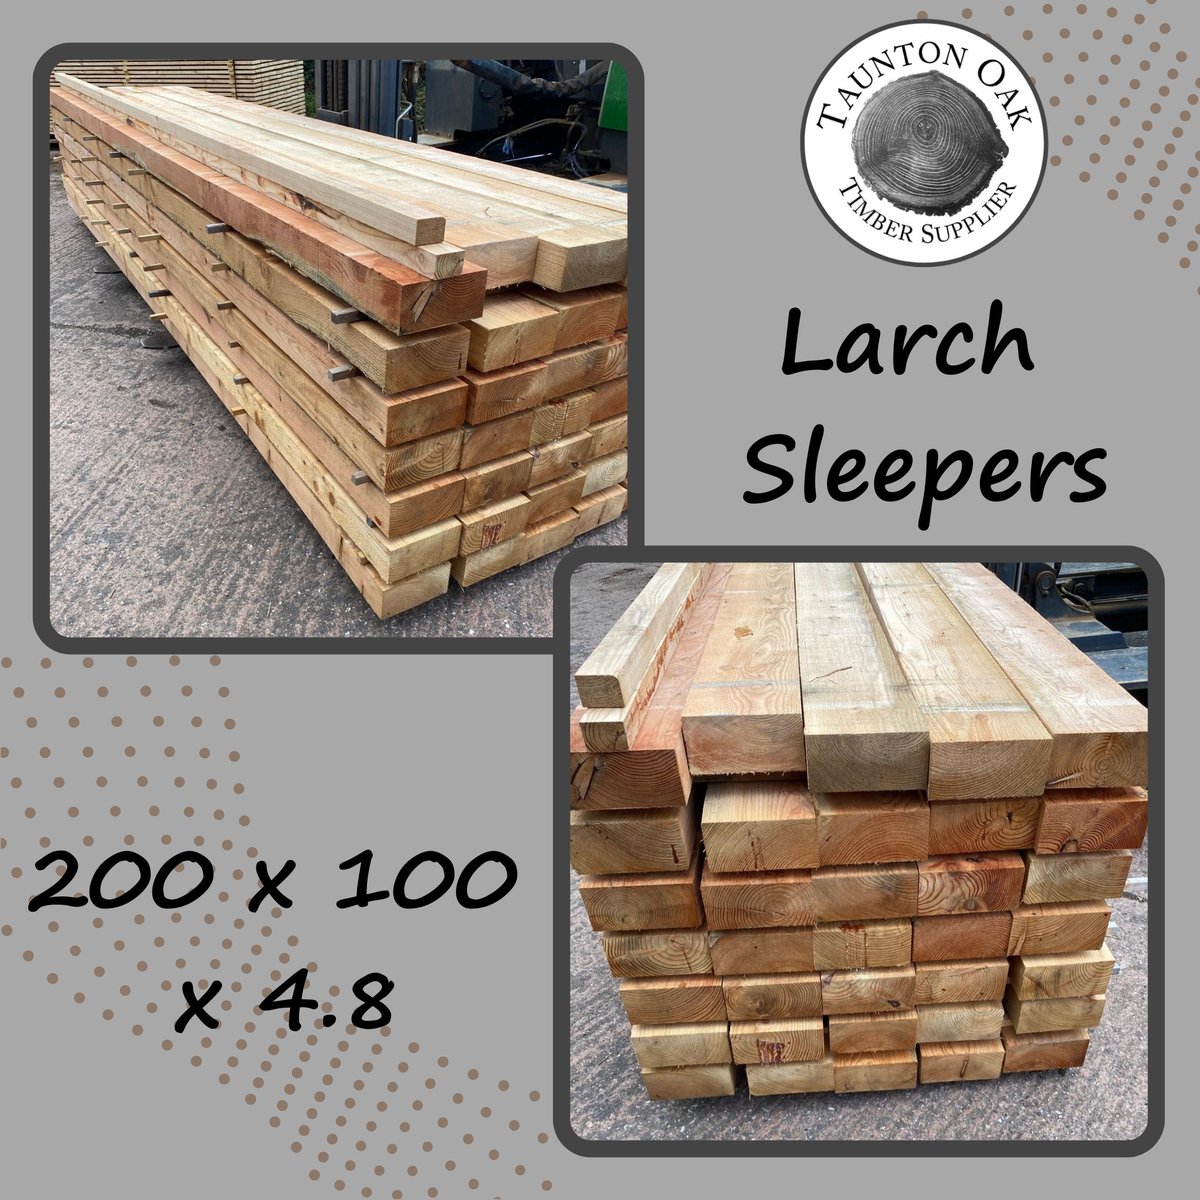 Larch 200 x 100 x 4.8. Perfect sleepers for garden structures & raised vegetable or flower beds 🌷🍅
#TauntonOak #OakFlooring #SolidOakFlooring #BeautifulHome #HouseAHome #NoPlaceLikeHome #HomeFlooring #SummerGarden